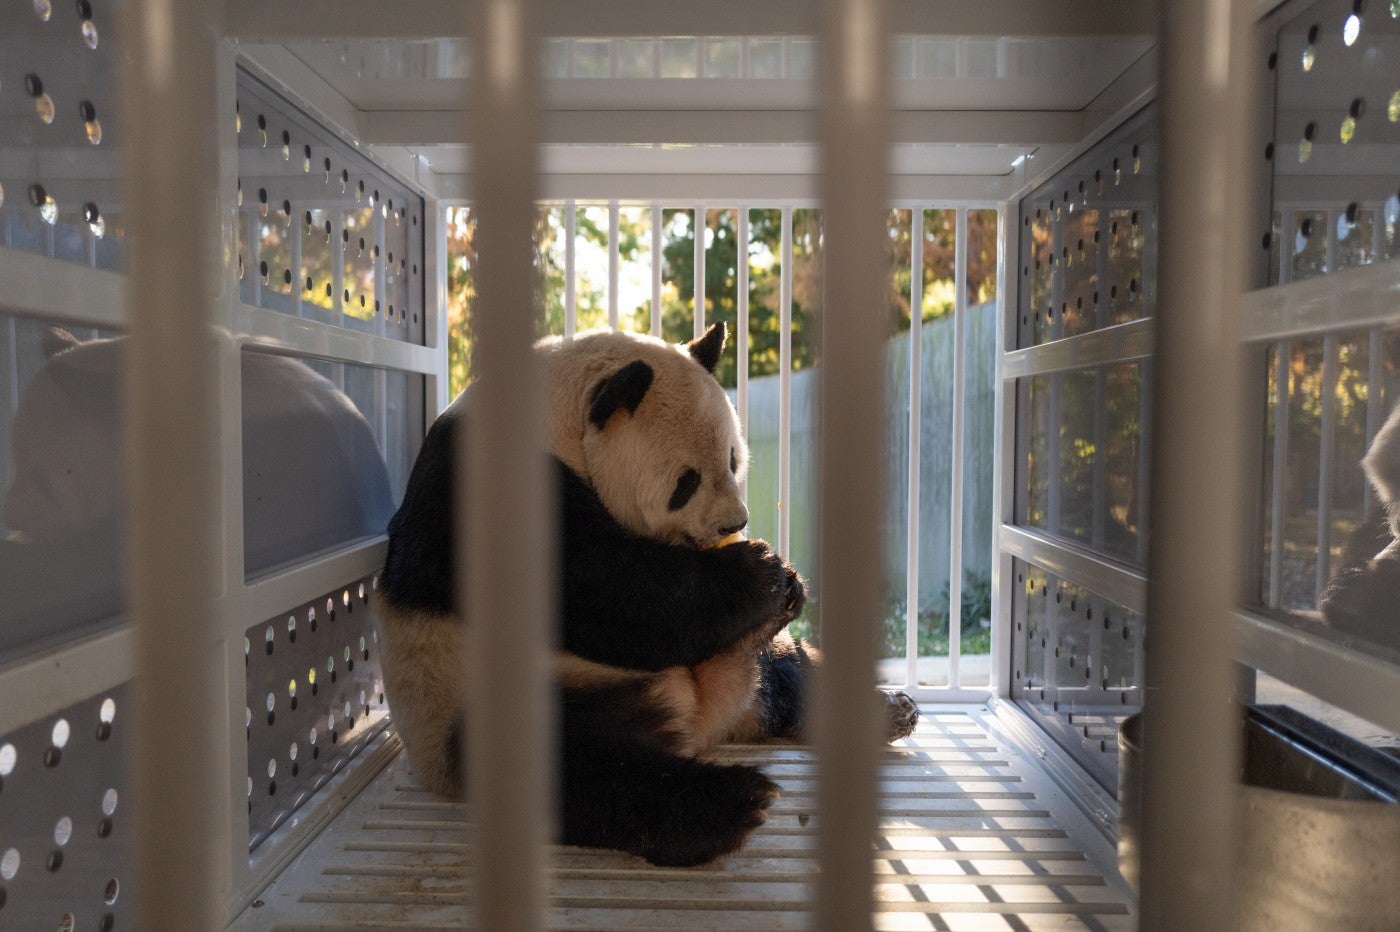 Black and white adult male giant panda Tian Tian eats a frozen fruitsicle inside a white travel crate made of steel and plexiglass.